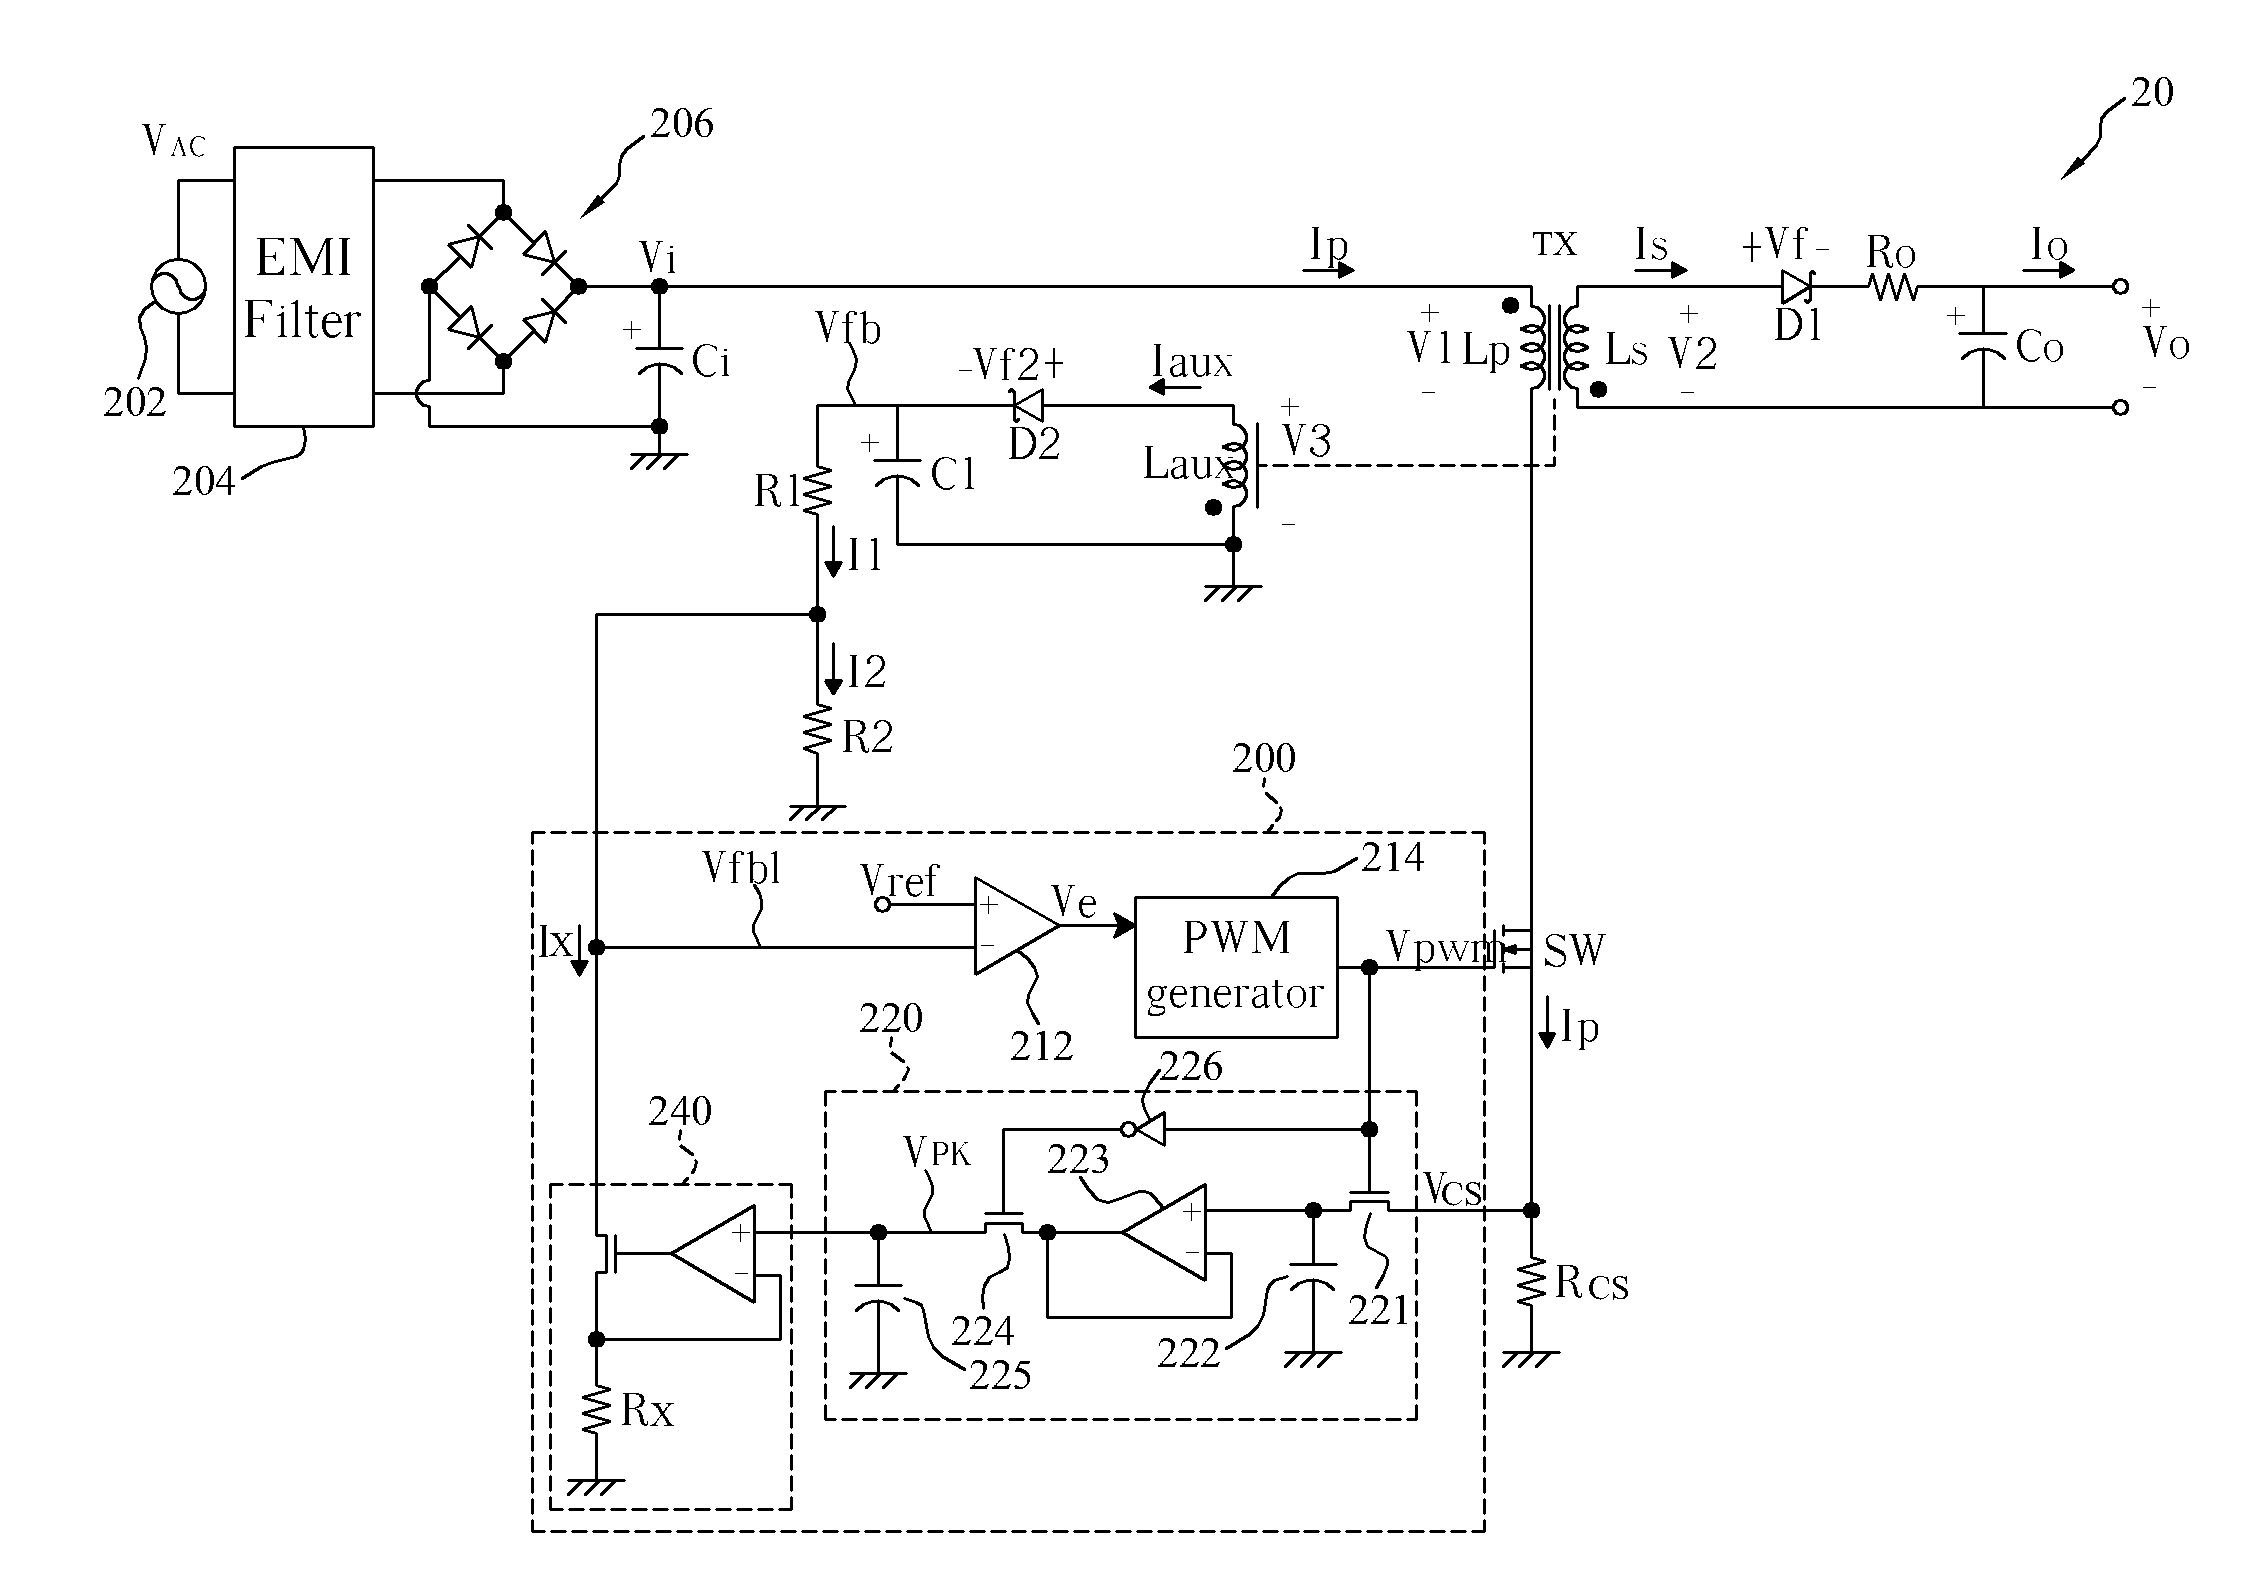 Switching-mode power converter and pulse-width-modulation control circuit with primary-side feedback control